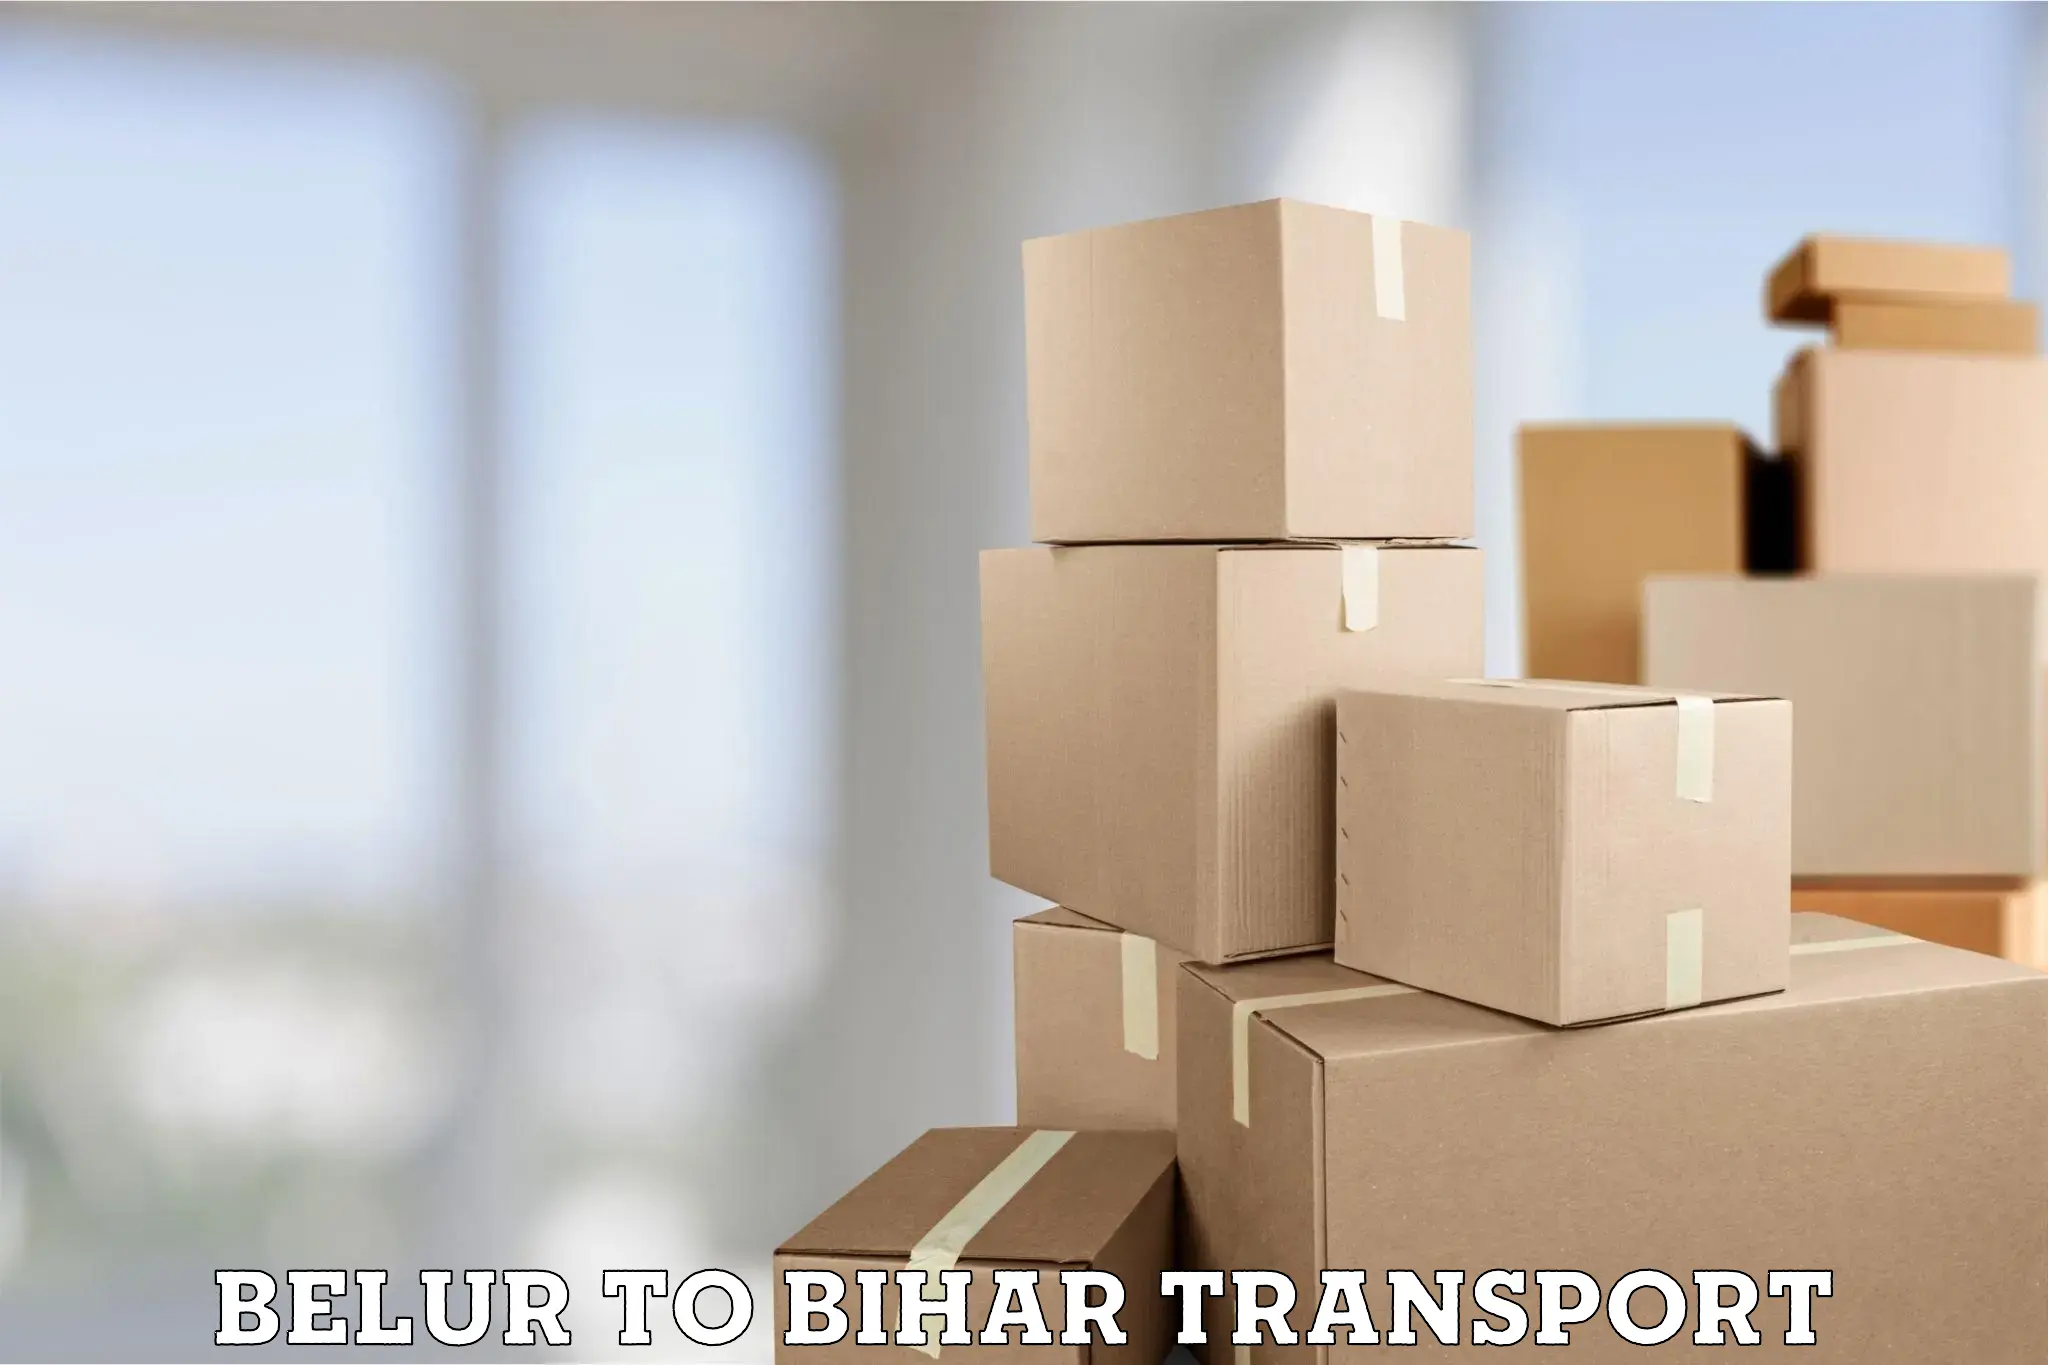 Container transport service Belur to Kumarkhand